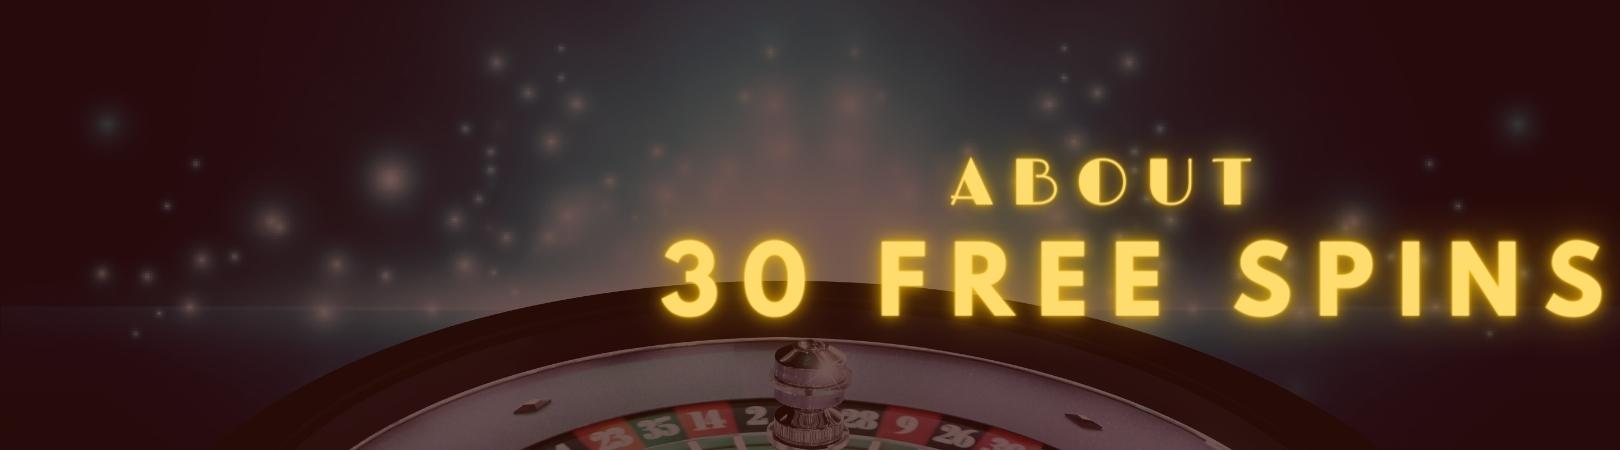 About 30 free spins img